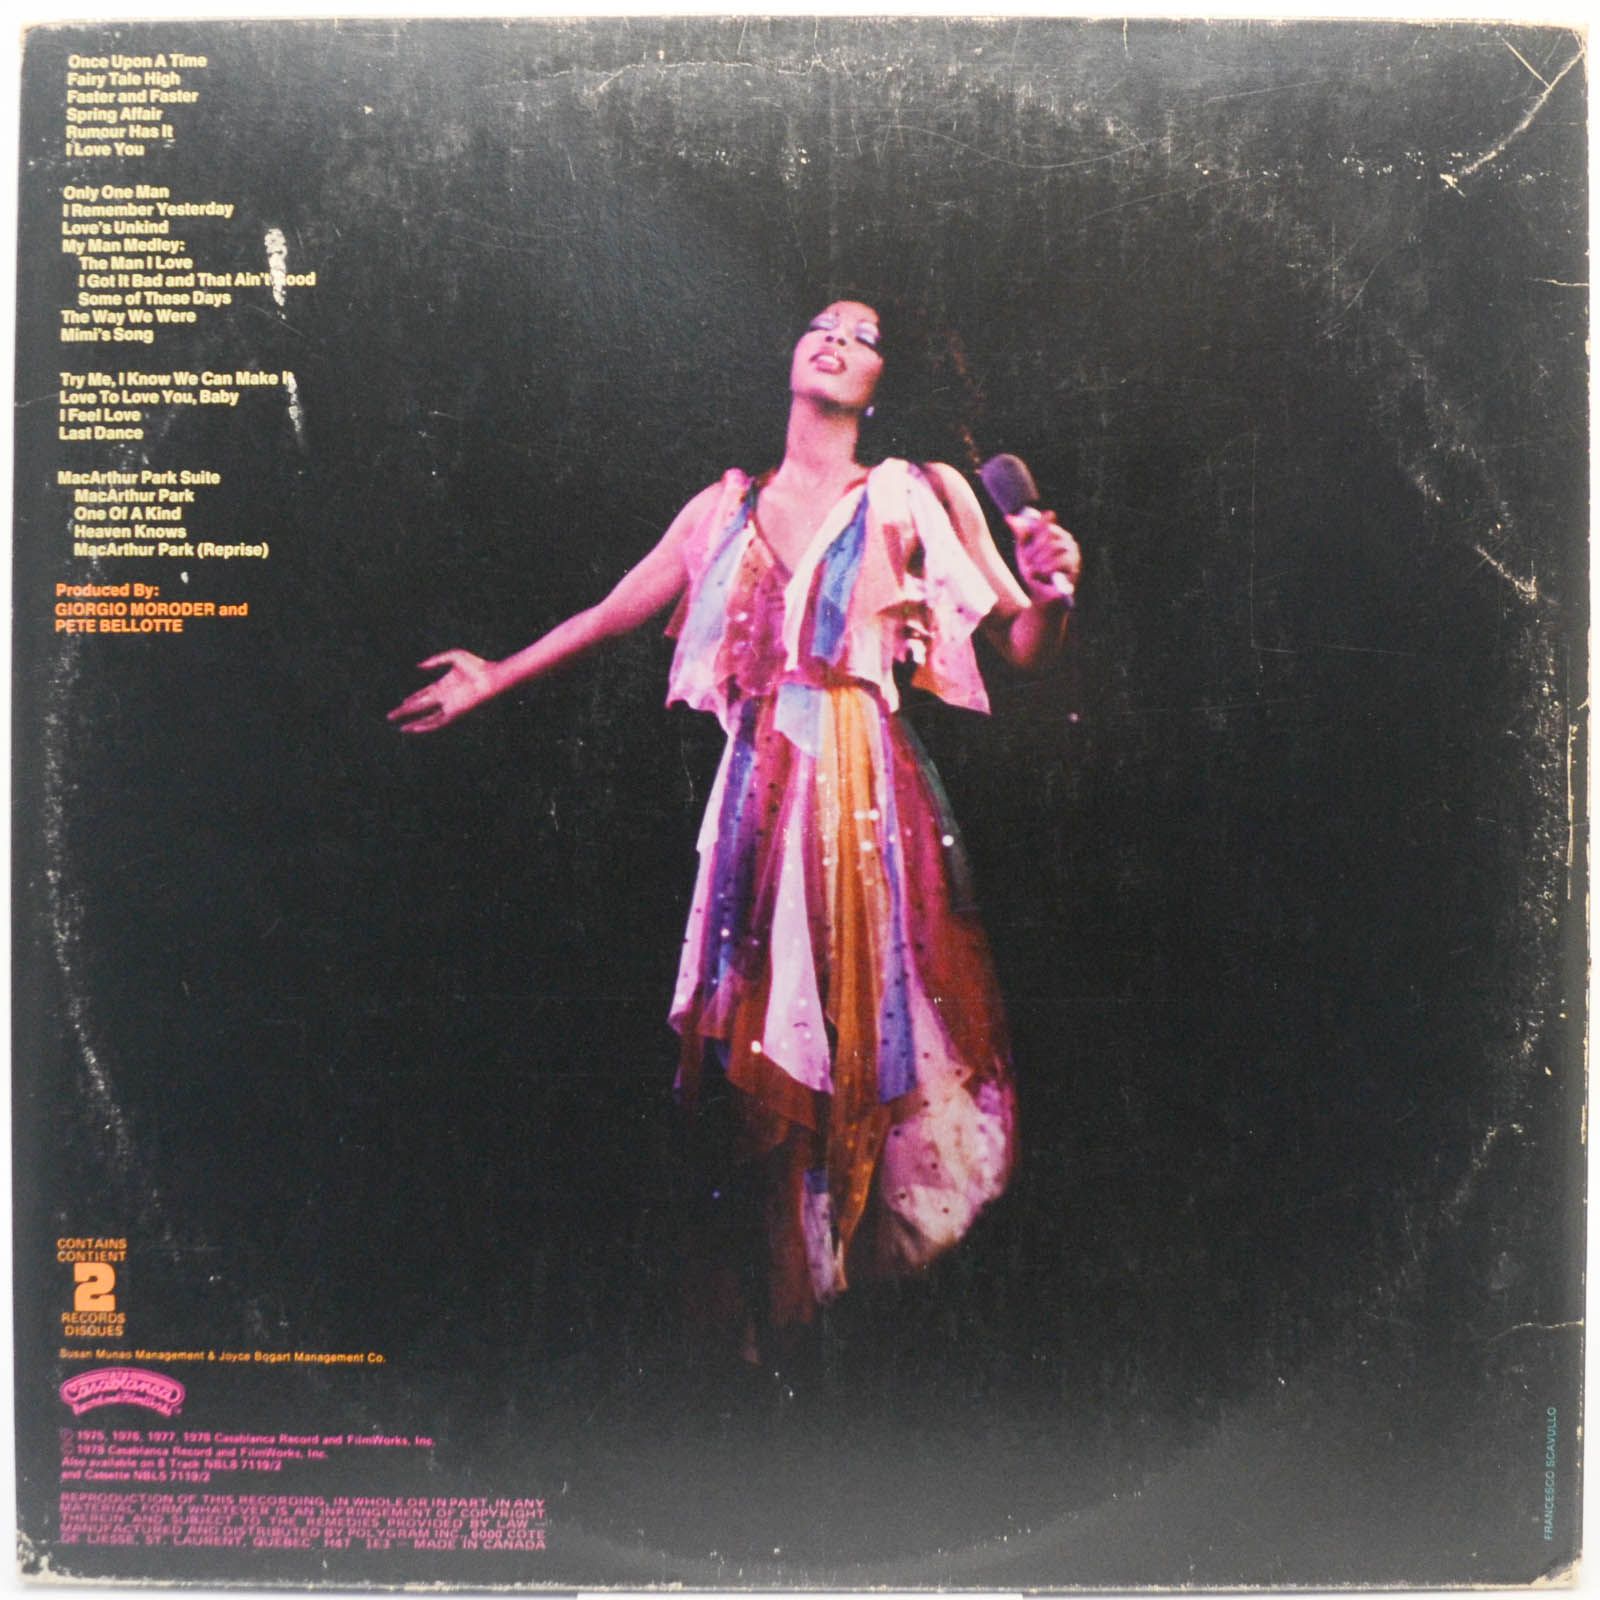 Donna Summer — Live And More (2LP), 1978